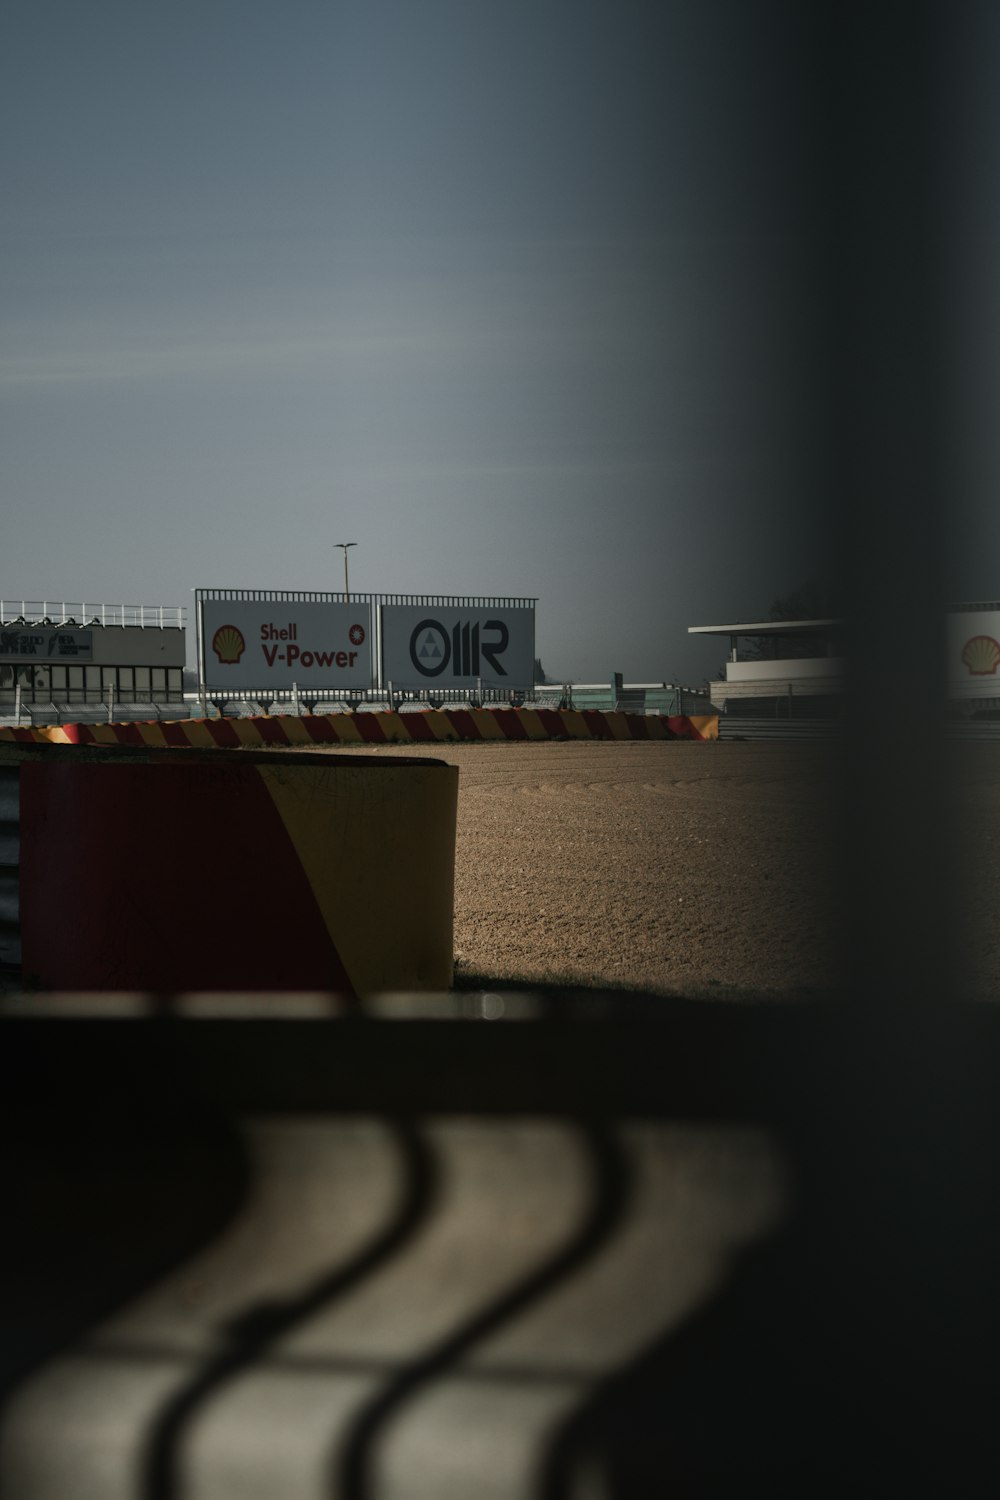 a view of a race track from behind a fence